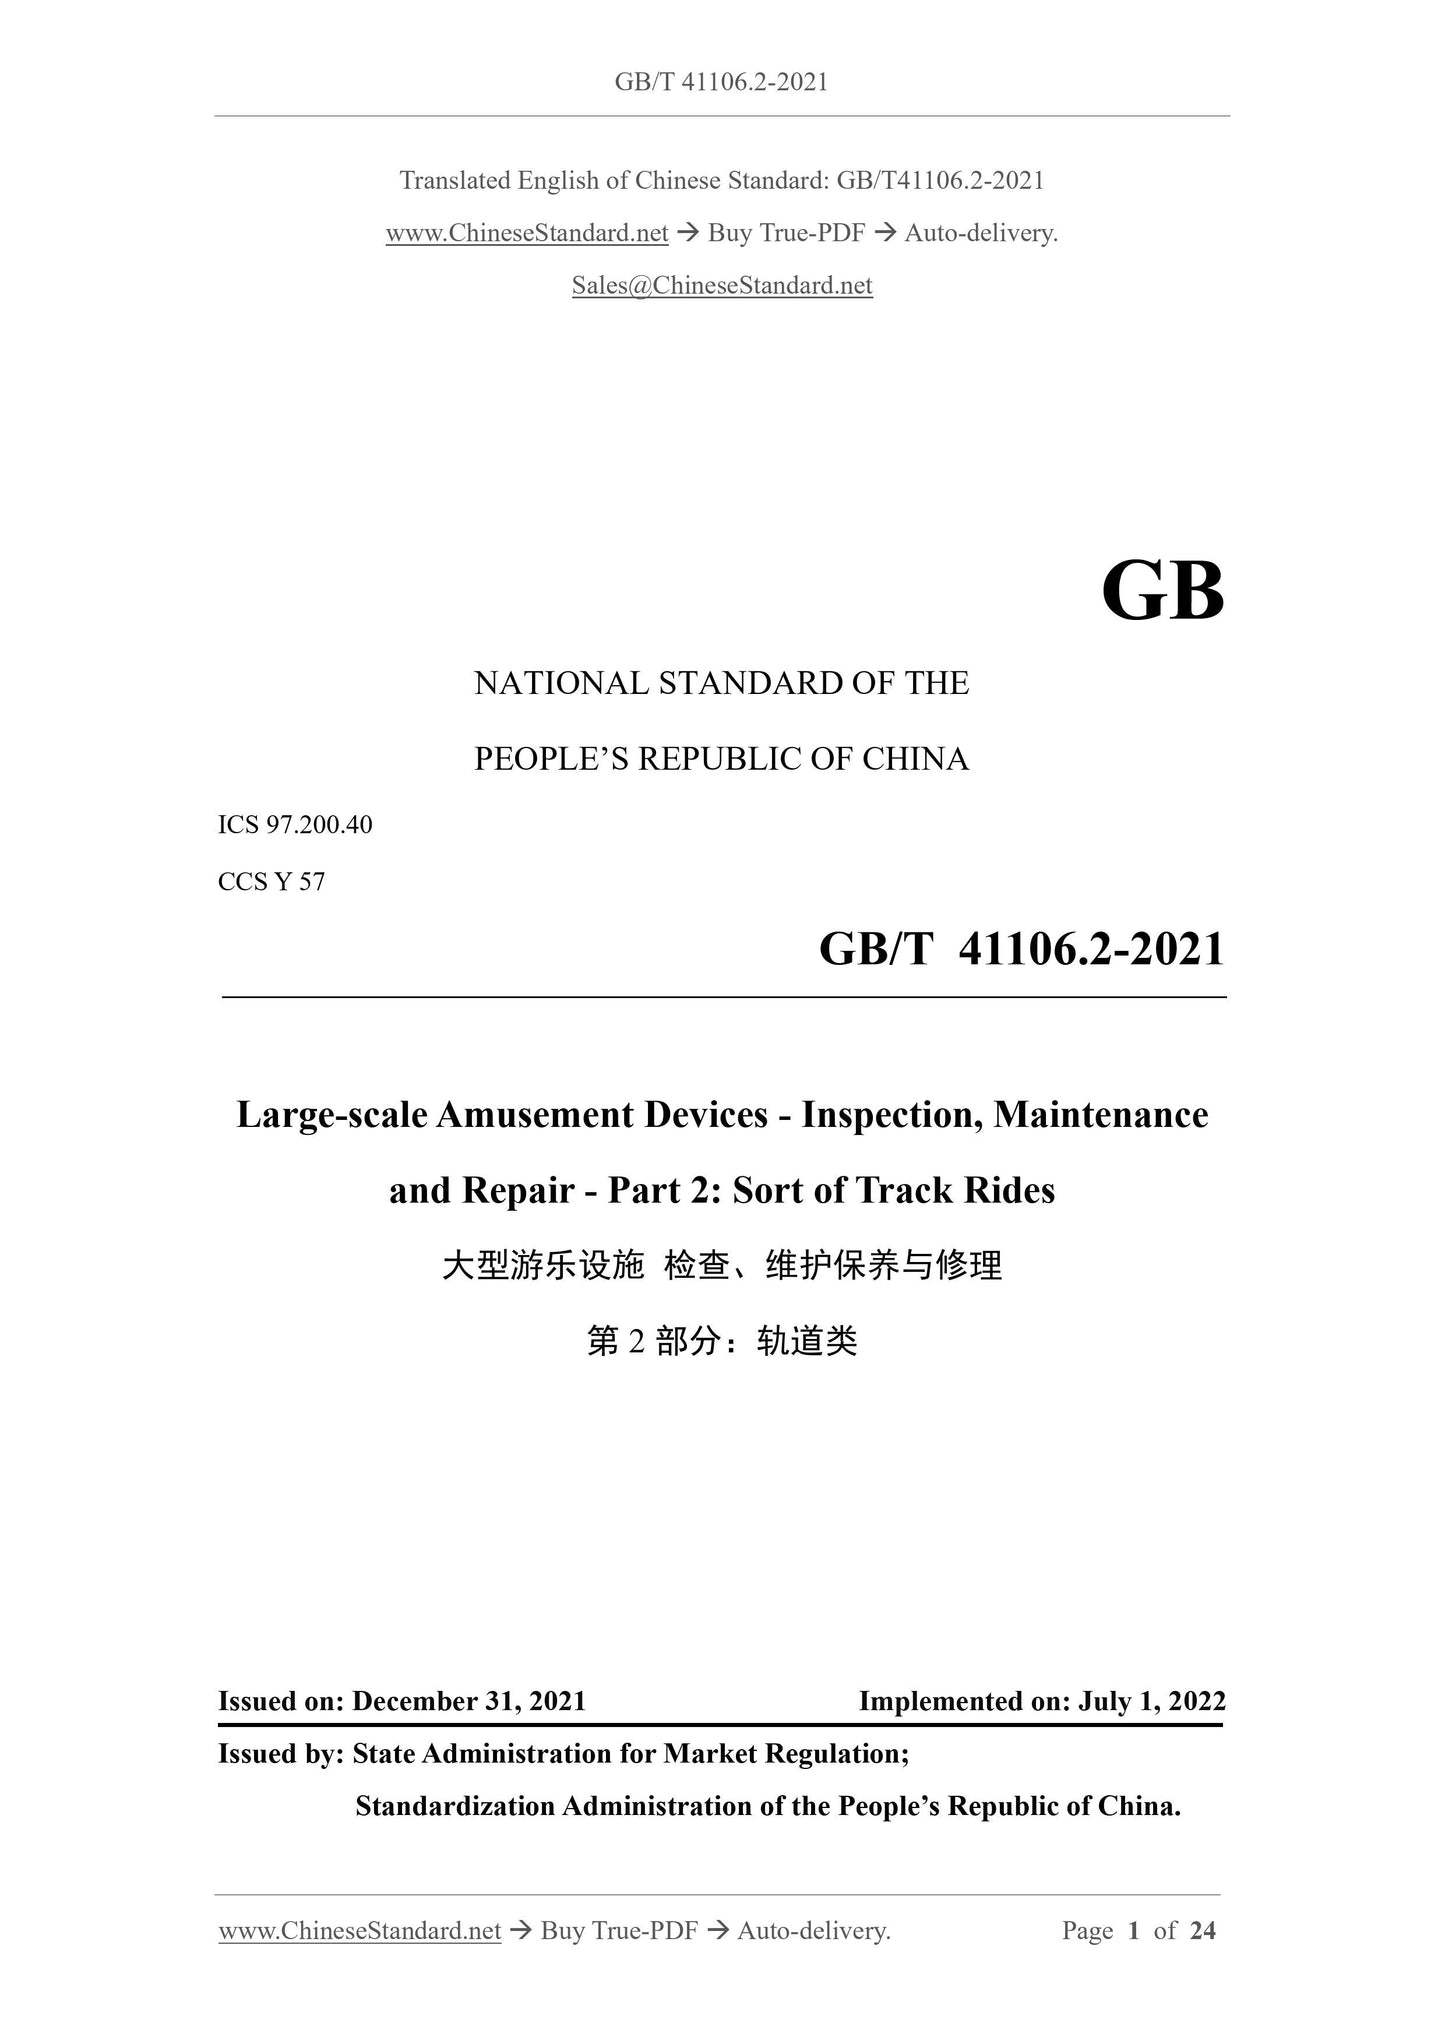 GB/T 41106.2-2021 Page 1